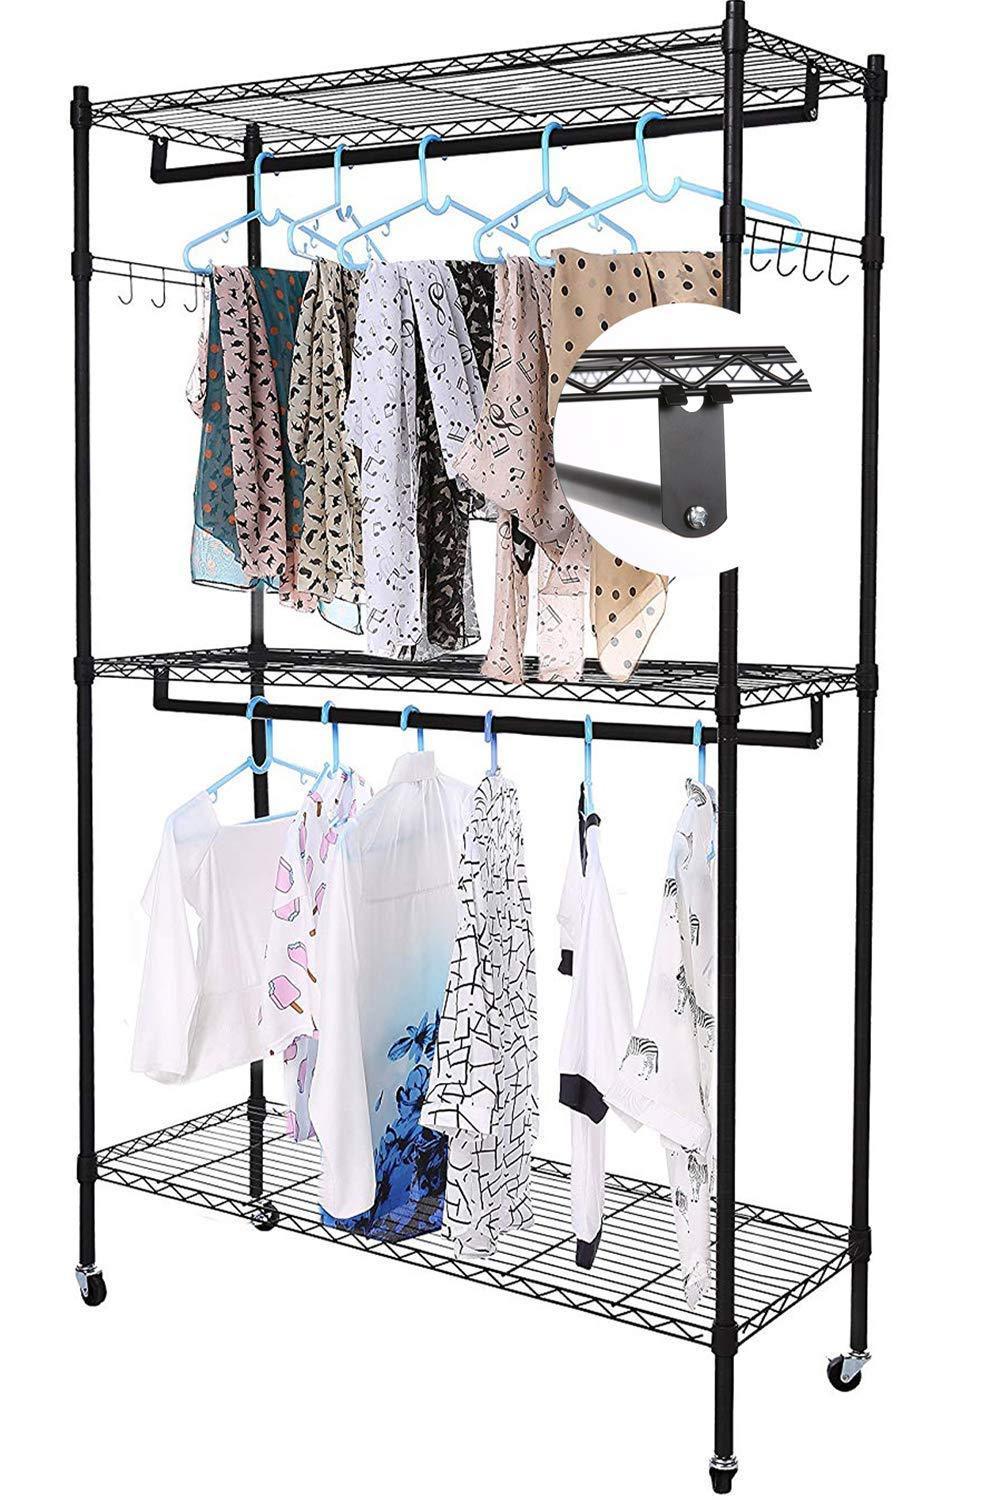 Discover miageek heavy duty garment rack rolling clothes rack free standing shelving wardrobe clothes closet storage organizer with hanging rods and lockable wheels black two pair hook